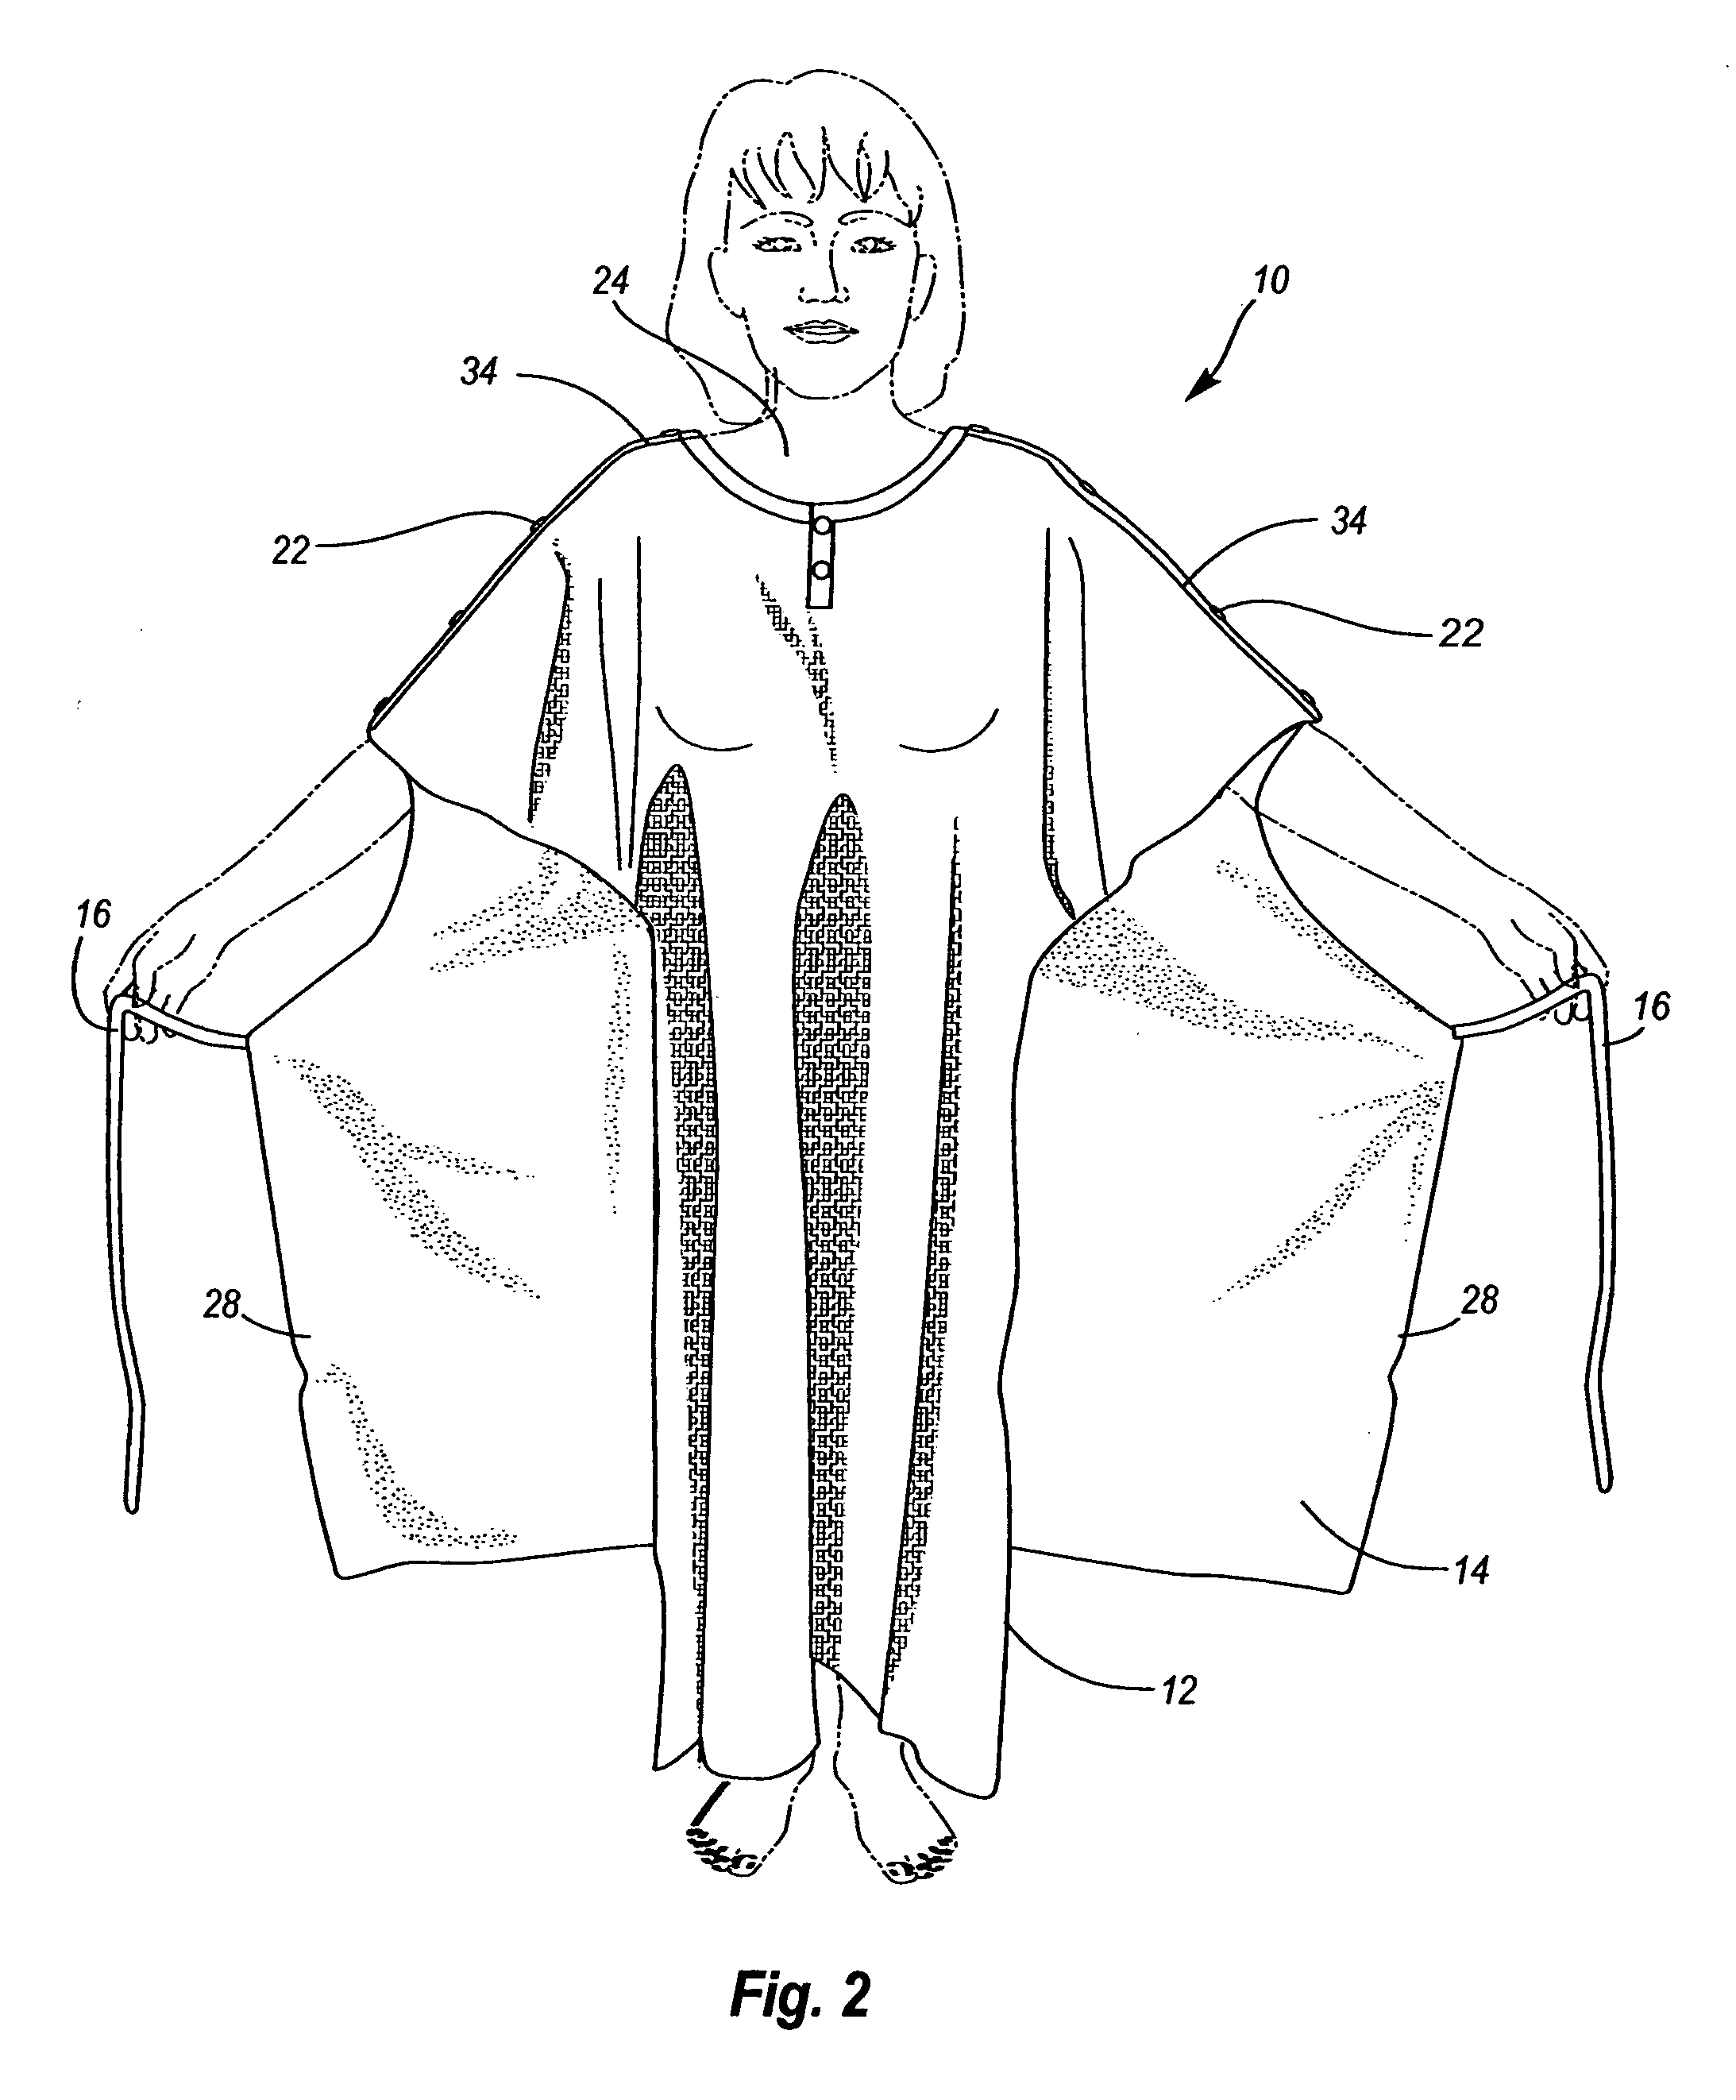 Hospital gown with enhanced privacy features